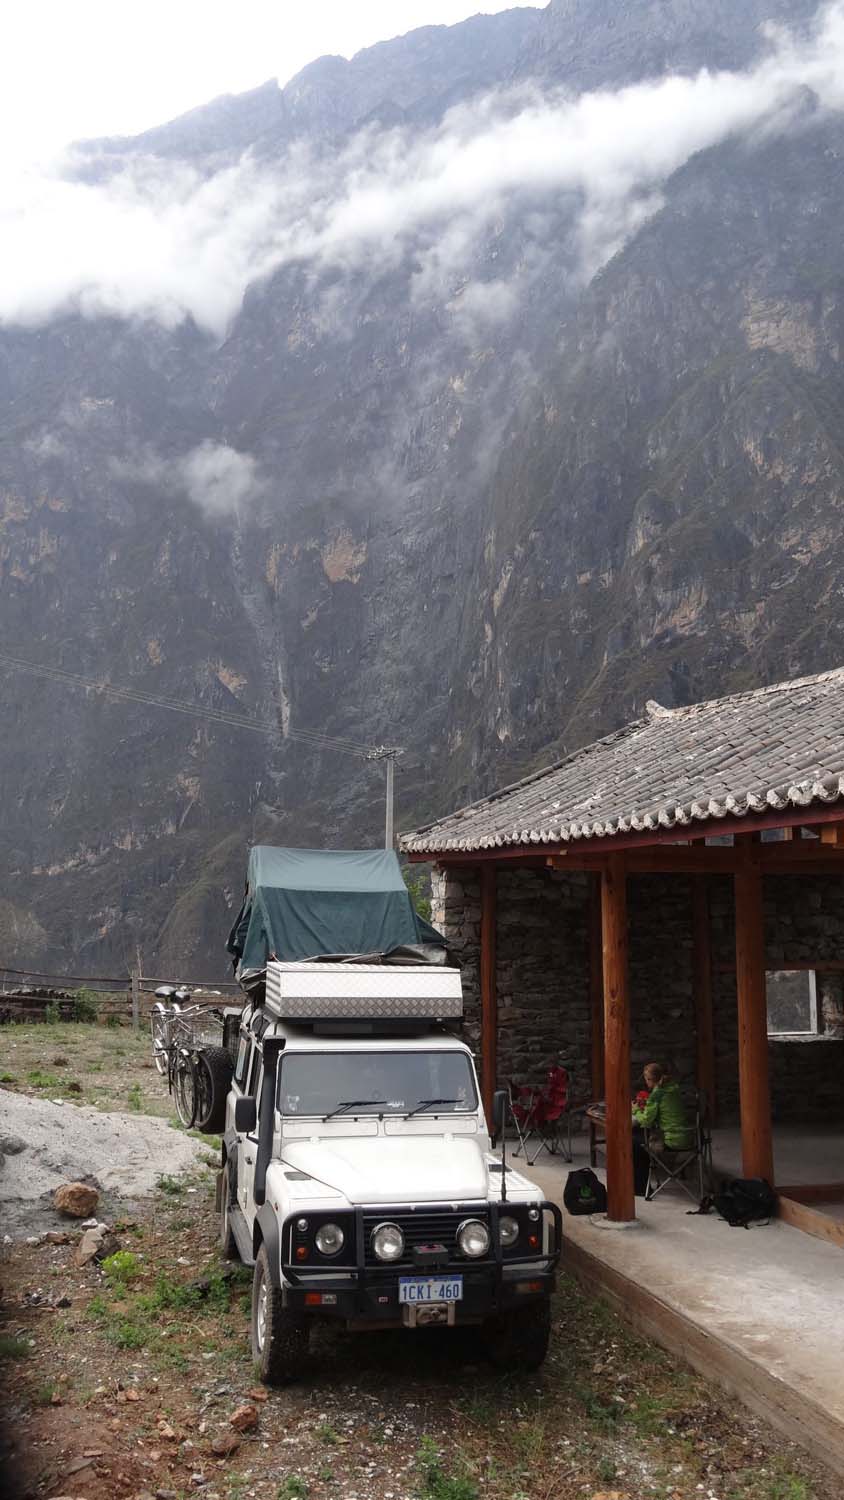 our campsite for the 2 nights - an unfinished house next to Tiger Leaping Gorge (very handy as it rained one night)